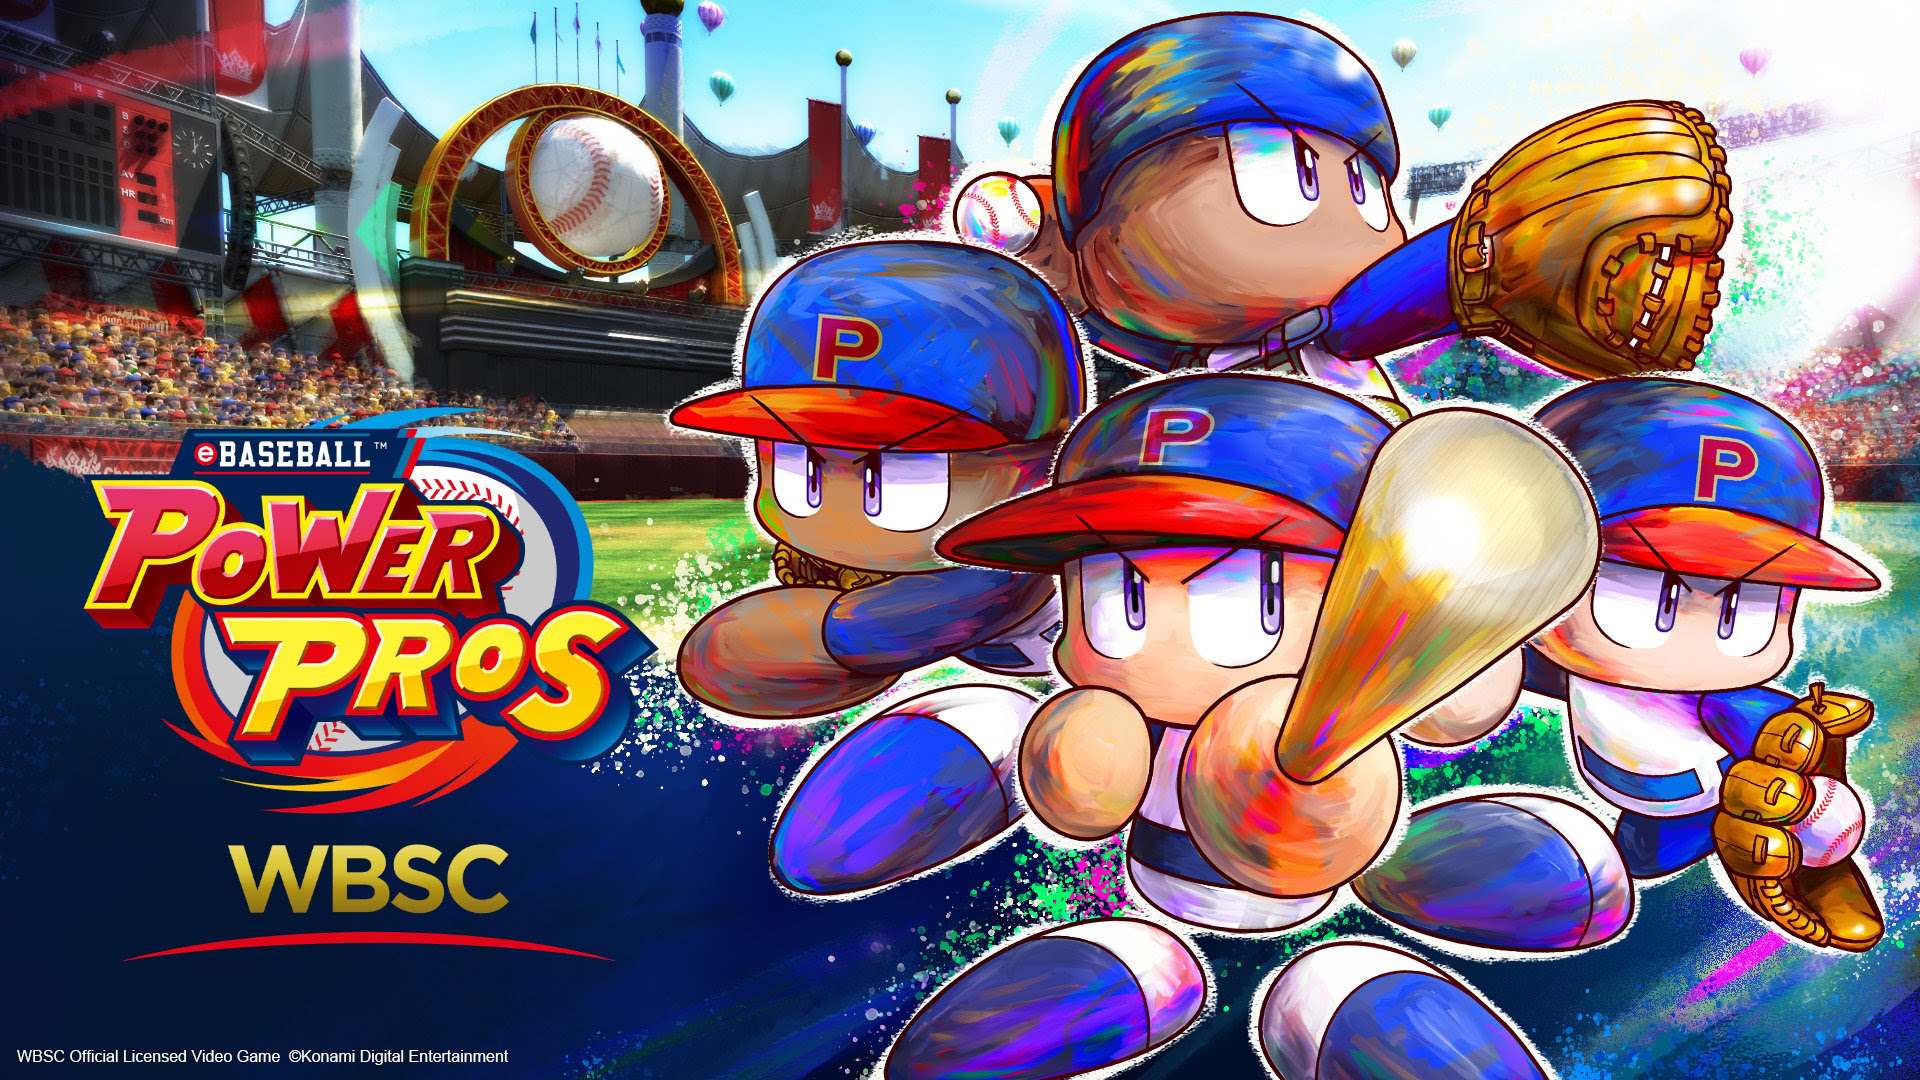 WBSC eBASEBALL: POWER PROS titolo ufficiale Olympic Esports Series 2023